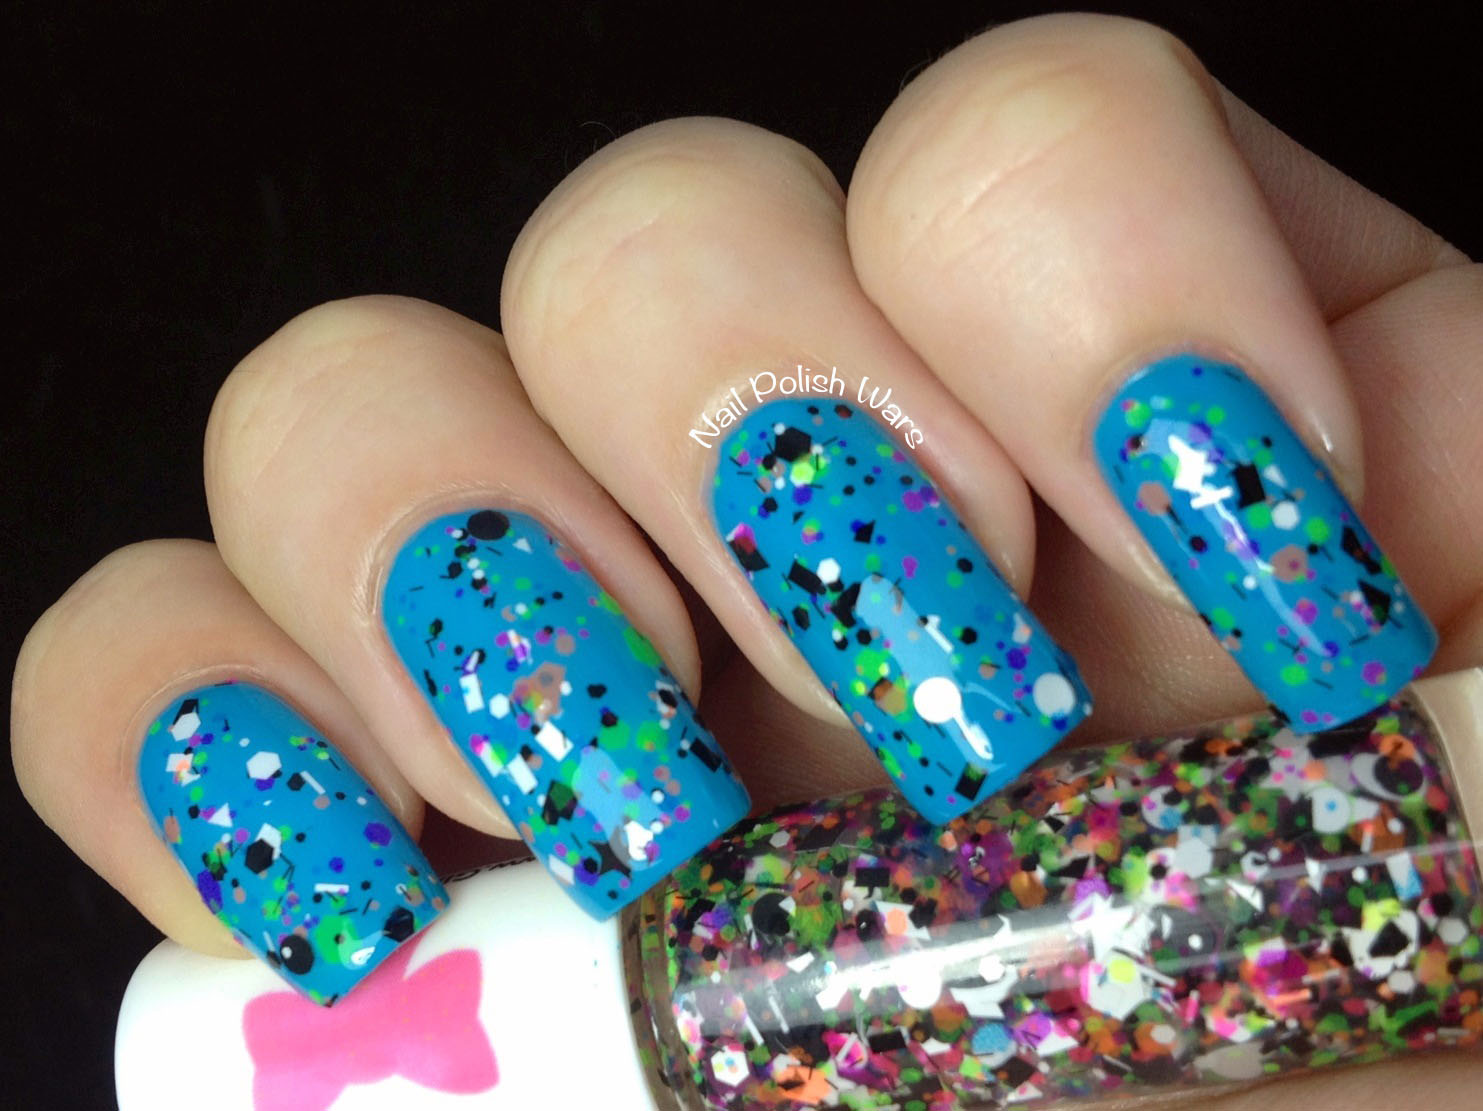 Nail Polish Wars: Glitter Daze ColorPOP Collection Swatch & Review